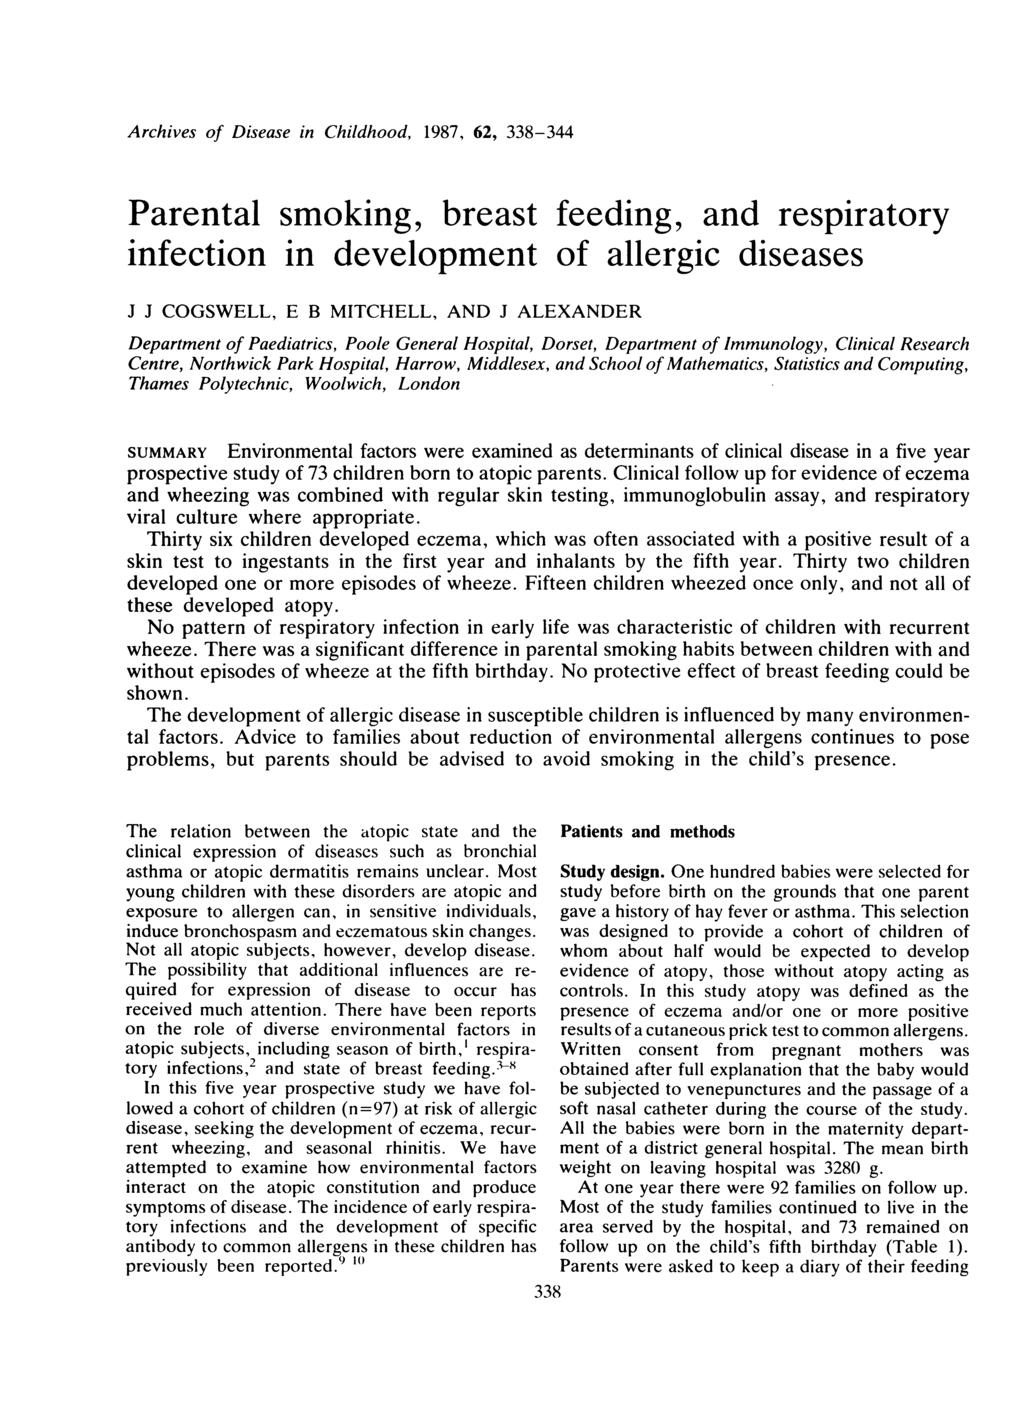 Archives of Disease in Childhood, 1987, 62, 338-344 Parental smoking, breast feeding, and respiratory infection in development of allergic diseases J J COGSWELL, E B MITCHELL, AND J ALEXANDER